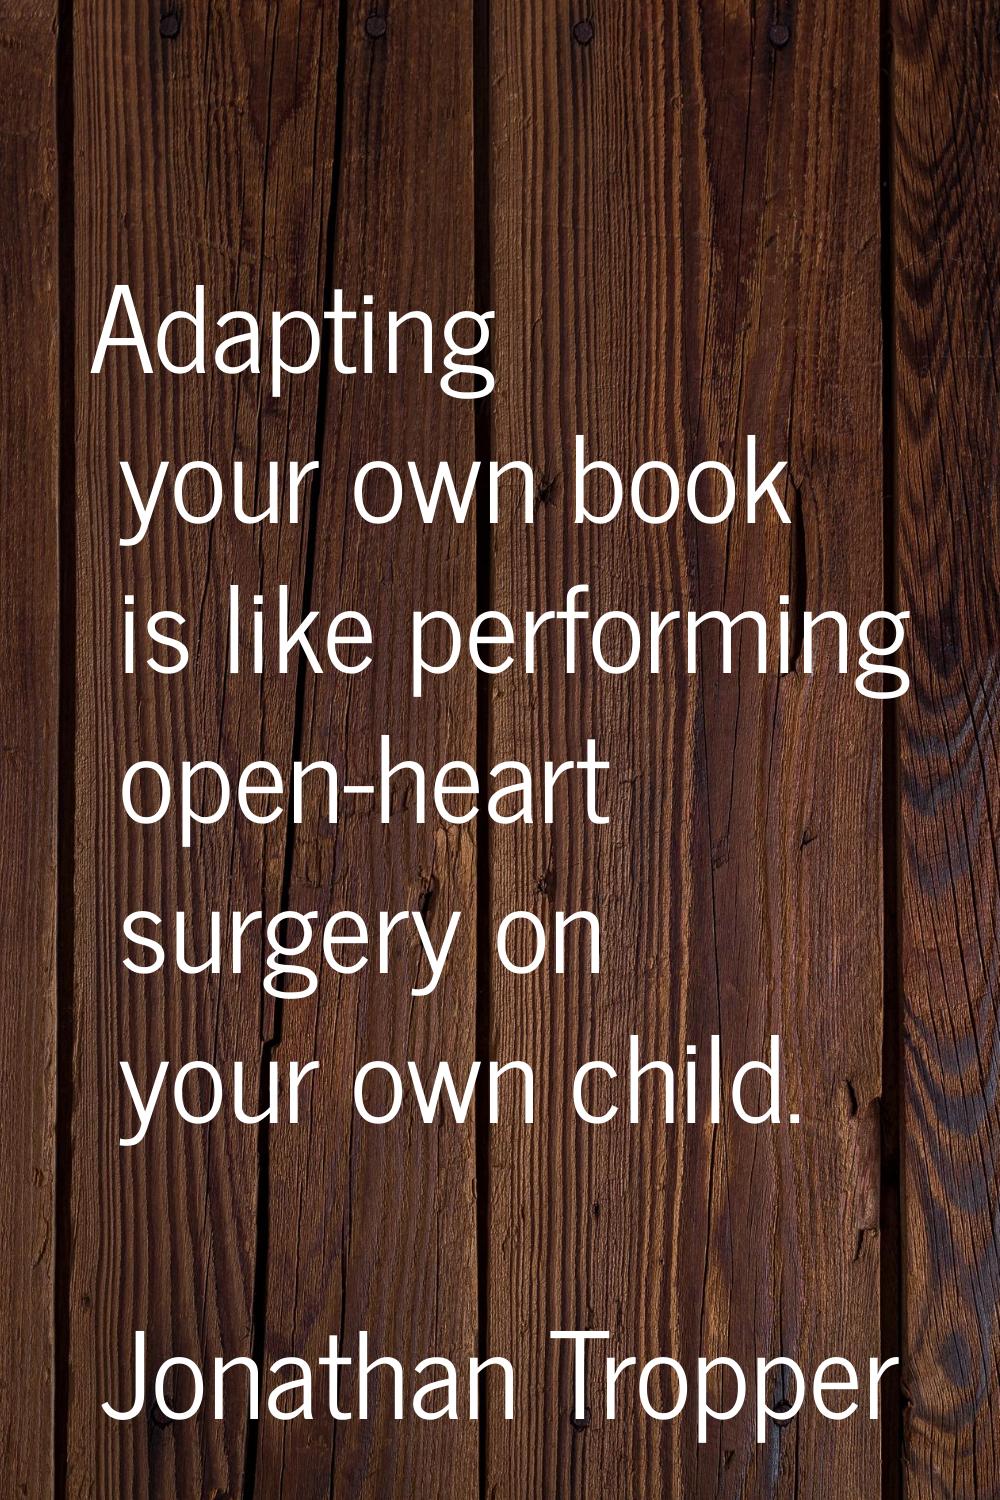 Adapting your own book is like performing open-heart surgery on your own child.